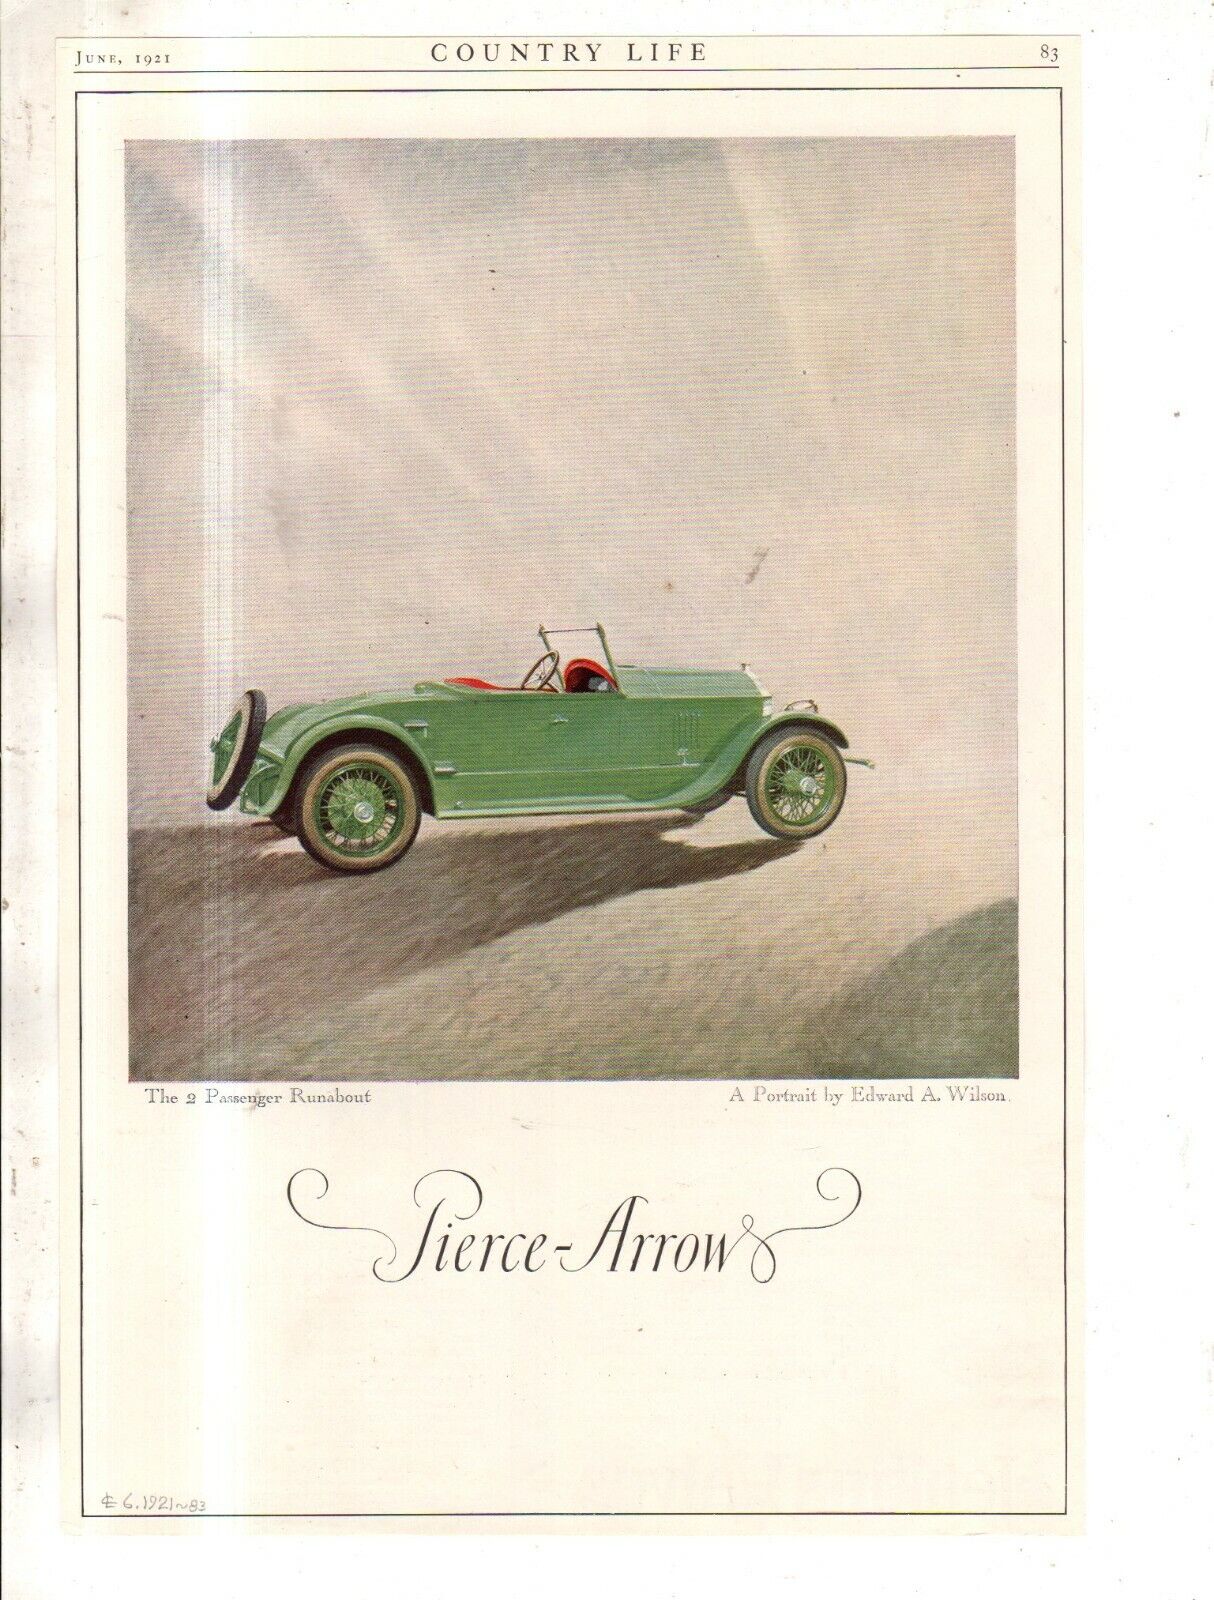 1921 Pierce Arrow 2 Passenger Runabout Original ad from Country Life -